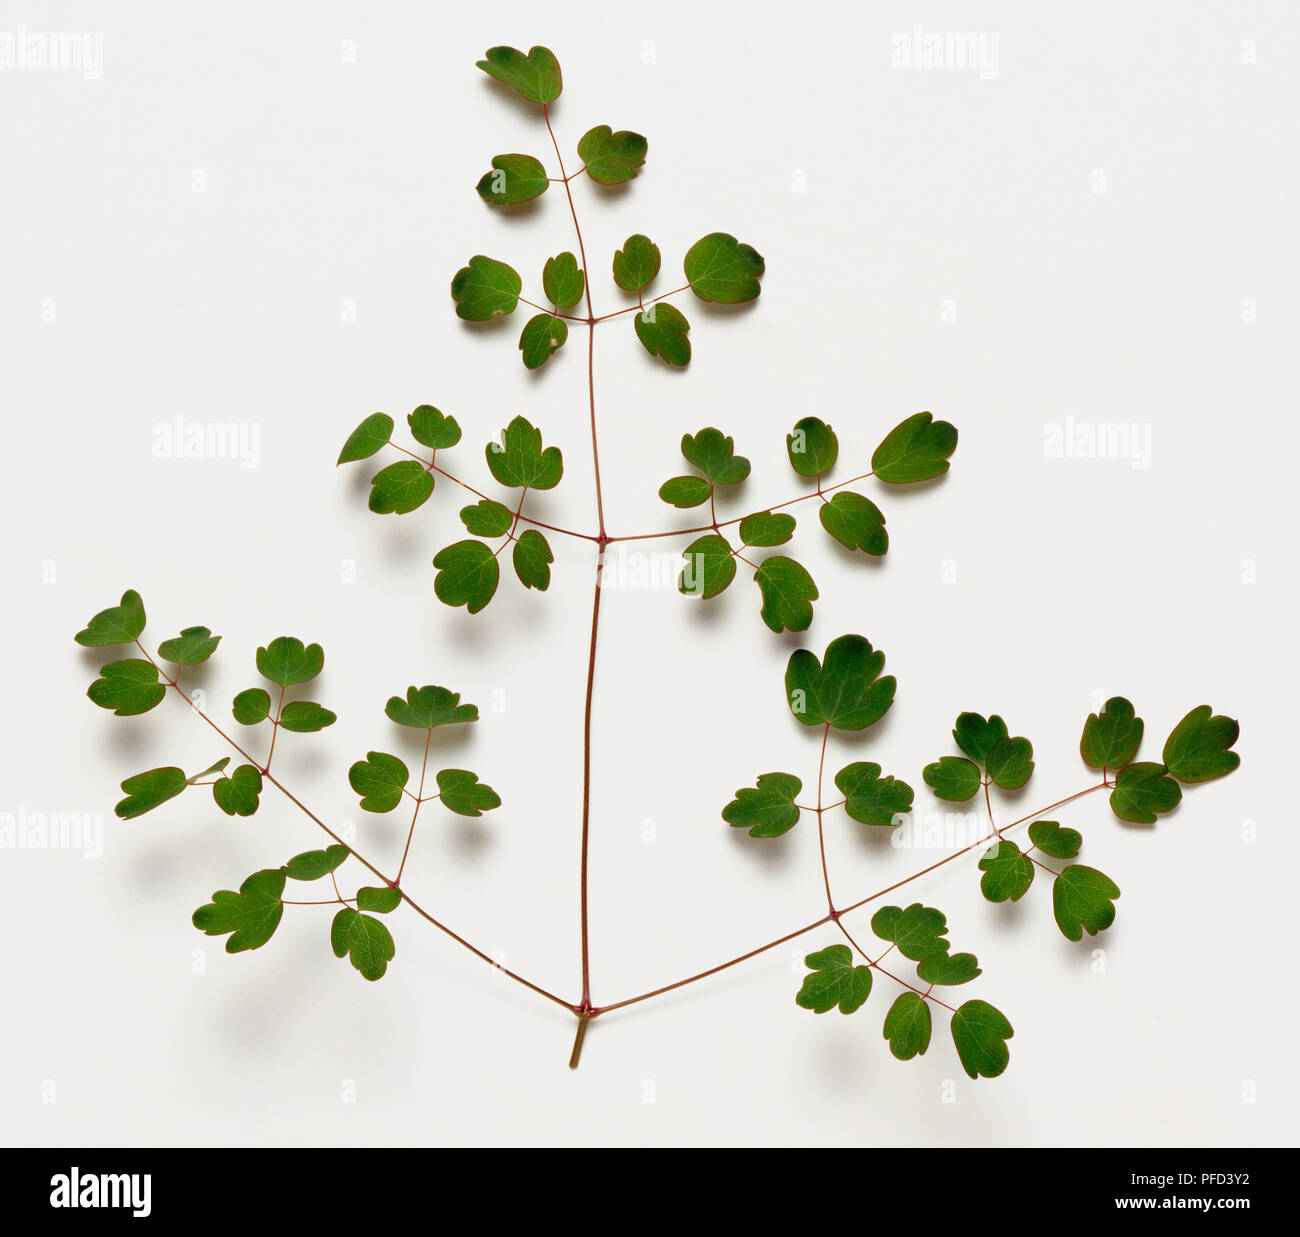 Meadow Rue, Thalictrum delavayi, stem and leaves. Stock Photo